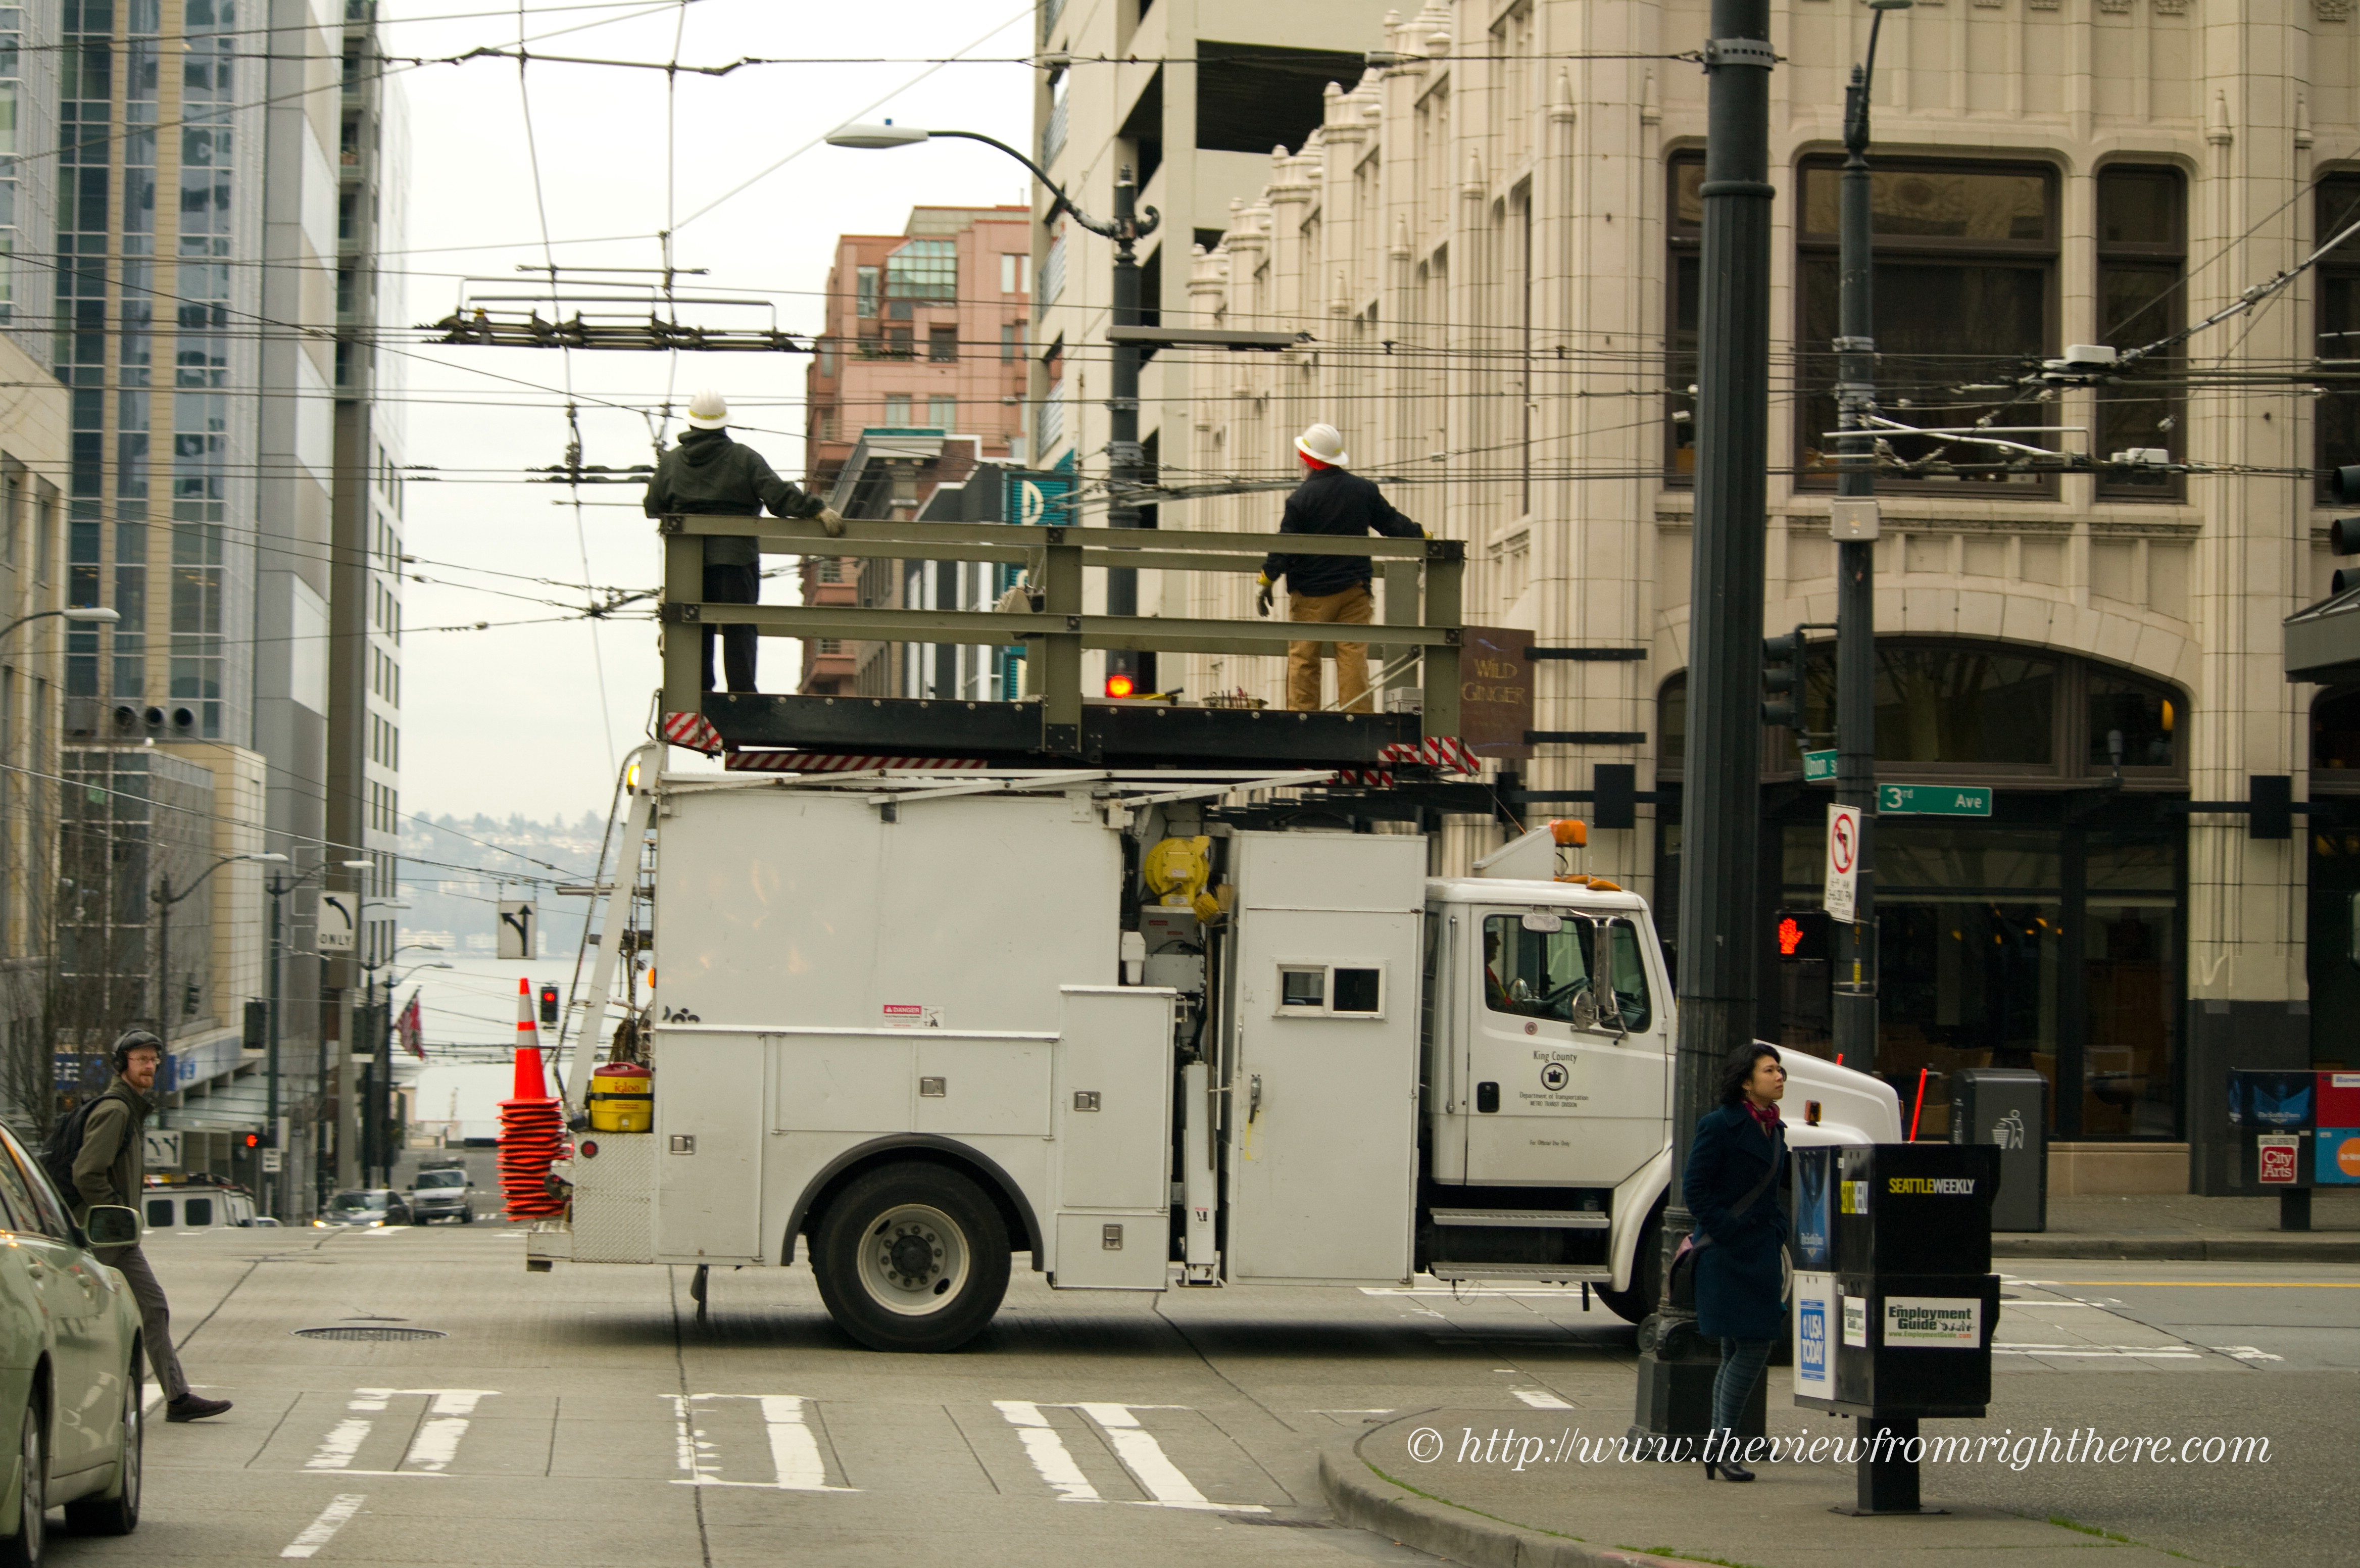 Checking Overhead Power Lines in Downtown Seattle